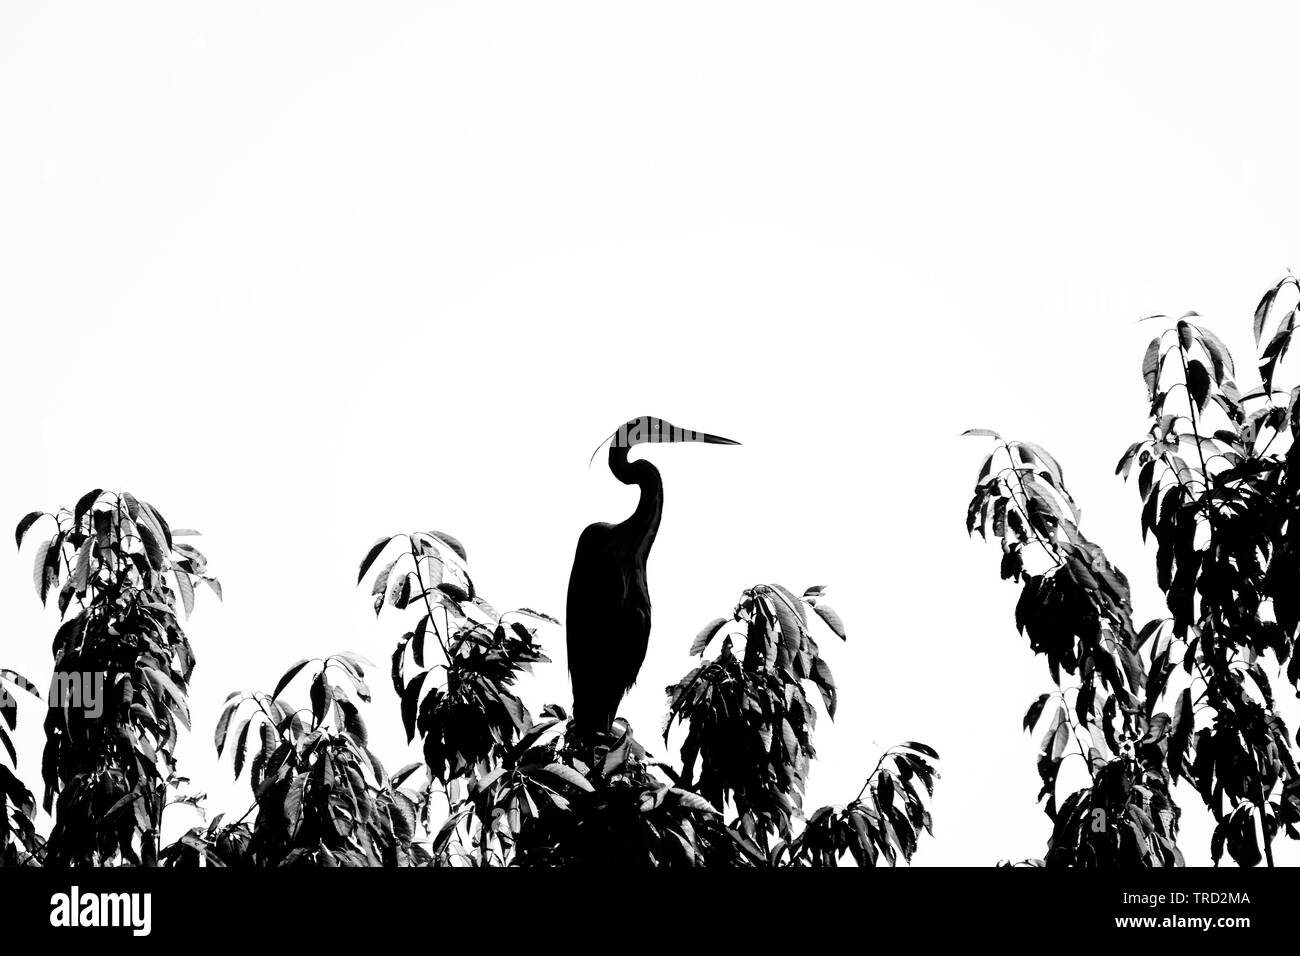 Silhouette of heron bird with curvilinear bent neck Stock Photo